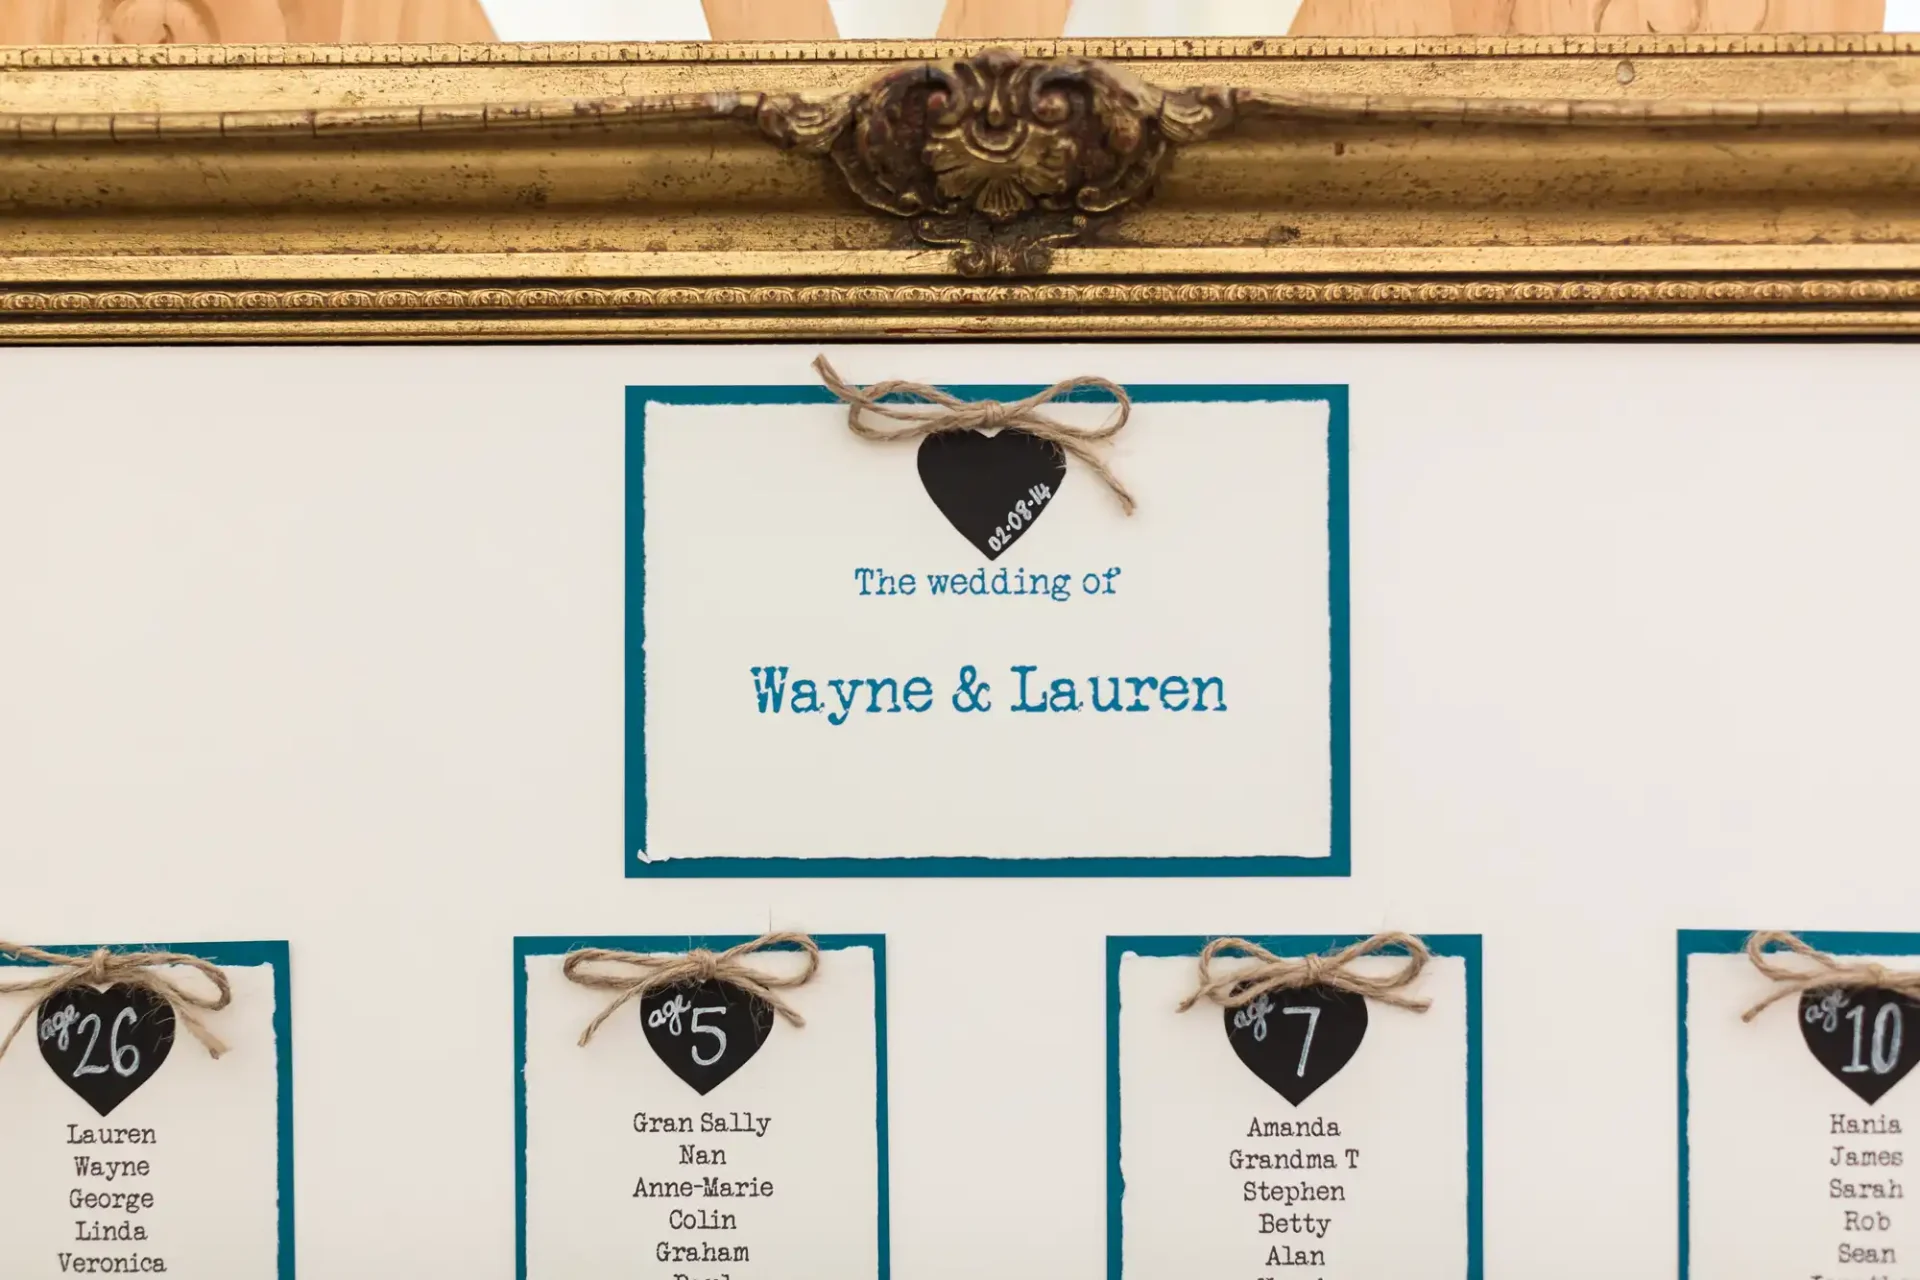 A seating chart for "the wedding of wayne & lauren" with guest names and table numbers listed on blue cards.